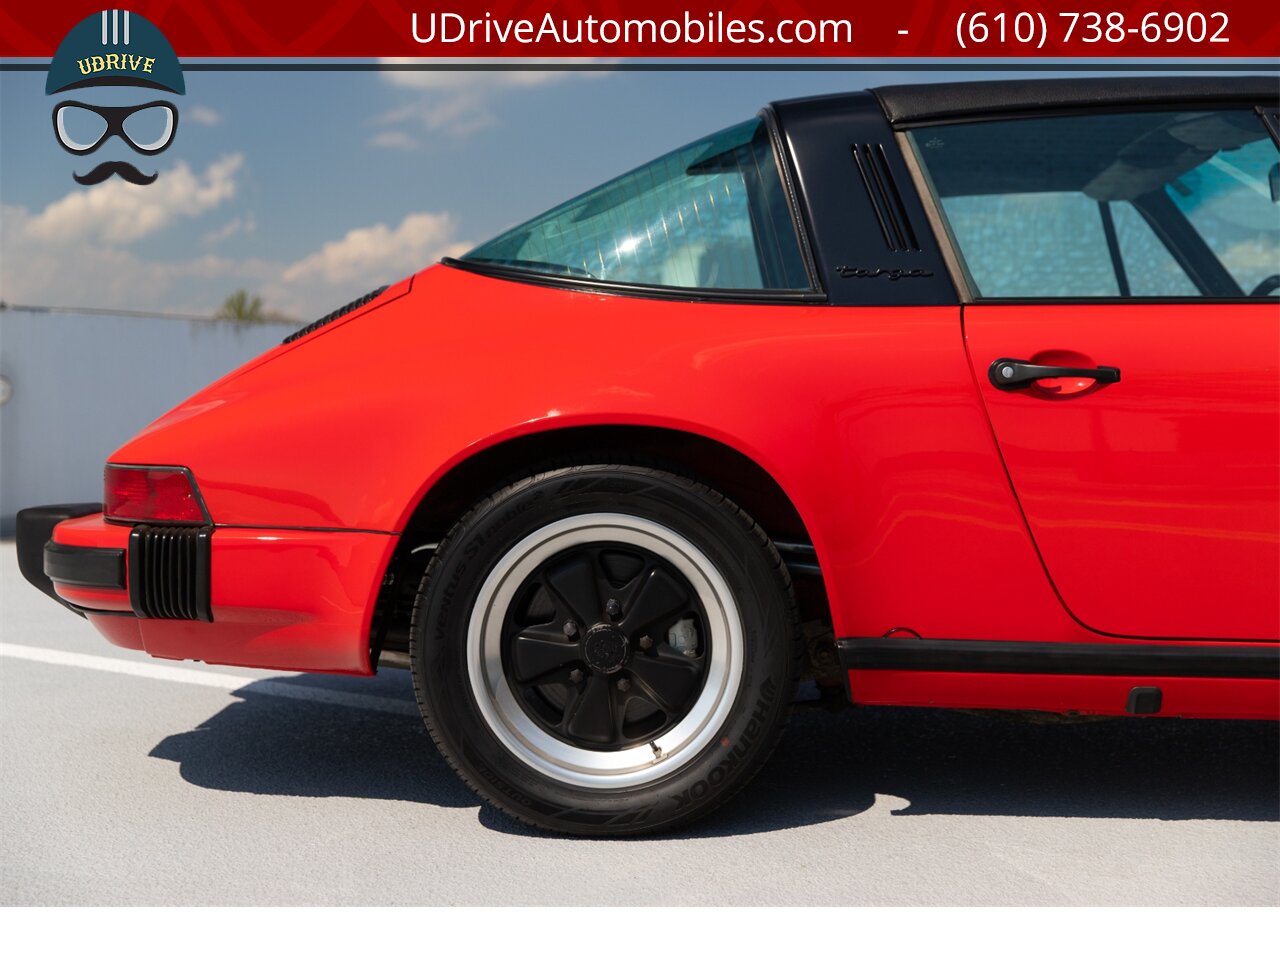 1986 Porsche 911 Carrera Targa 39k Miles Same Owner Since 1988  $23k in Service History Since 2011 - Photo 19 - West Chester, PA 19382